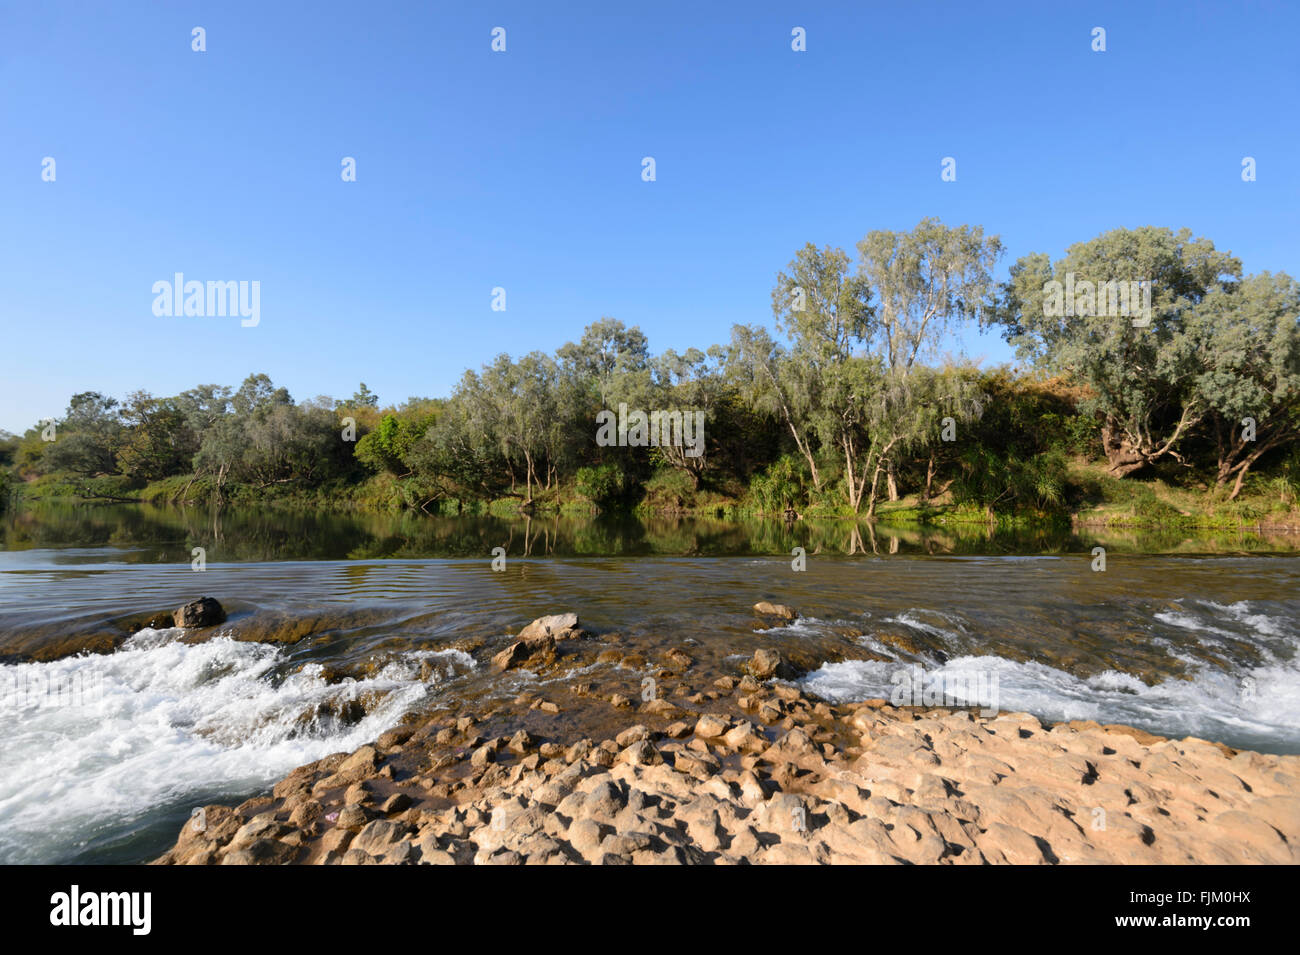 Daly River Crossing, Northern Territory, Australia Stock Photo